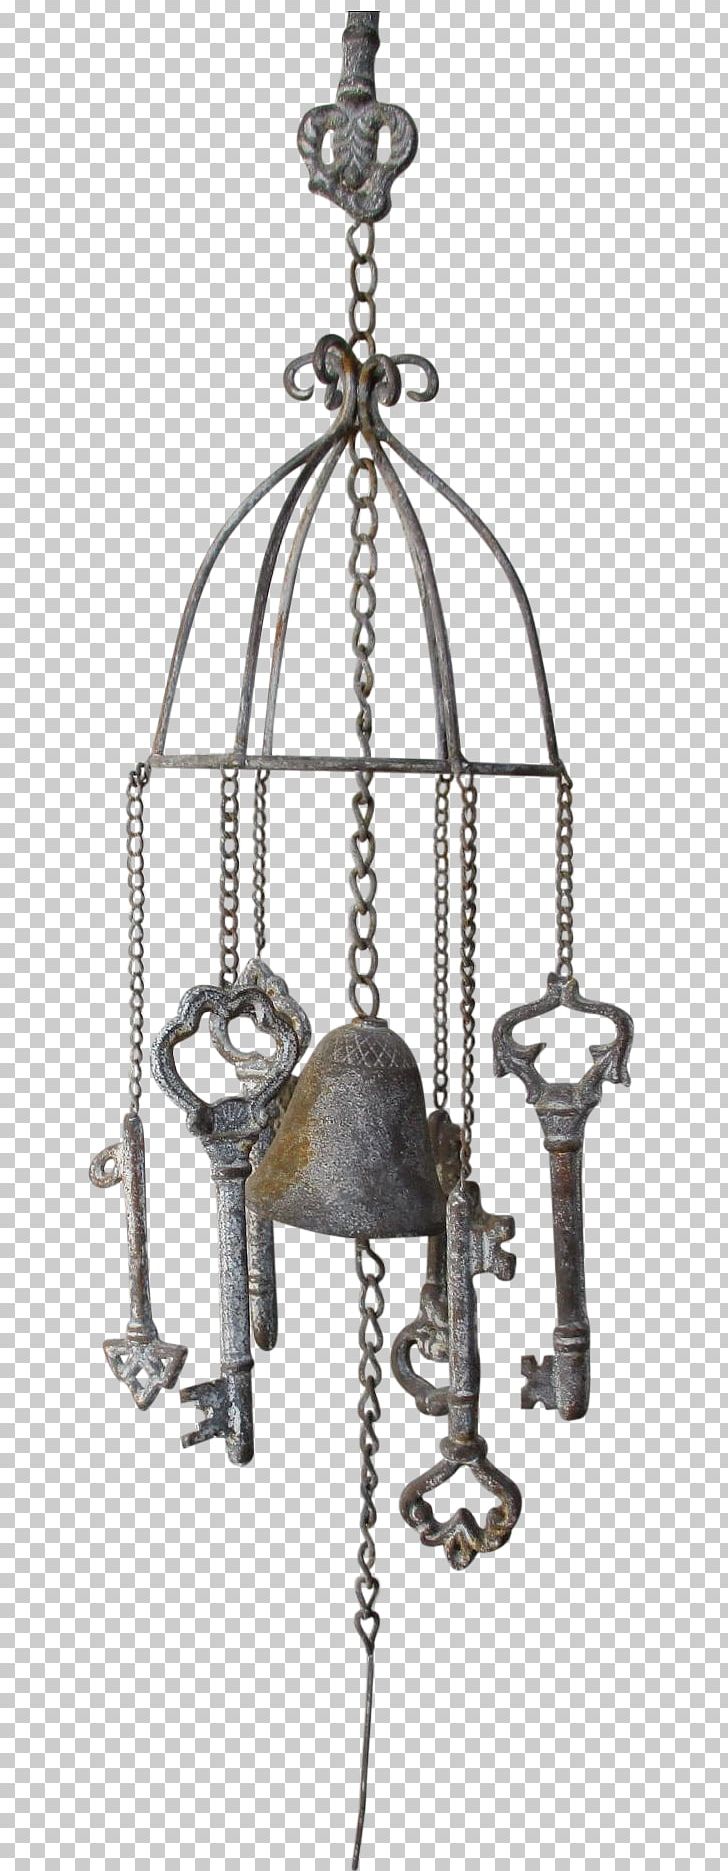 Skeleton Key Wind Chimes PNG, Clipart, Ceiling, Ceiling Fixture, Chairish, Chandelier, Chime Free PNG Download